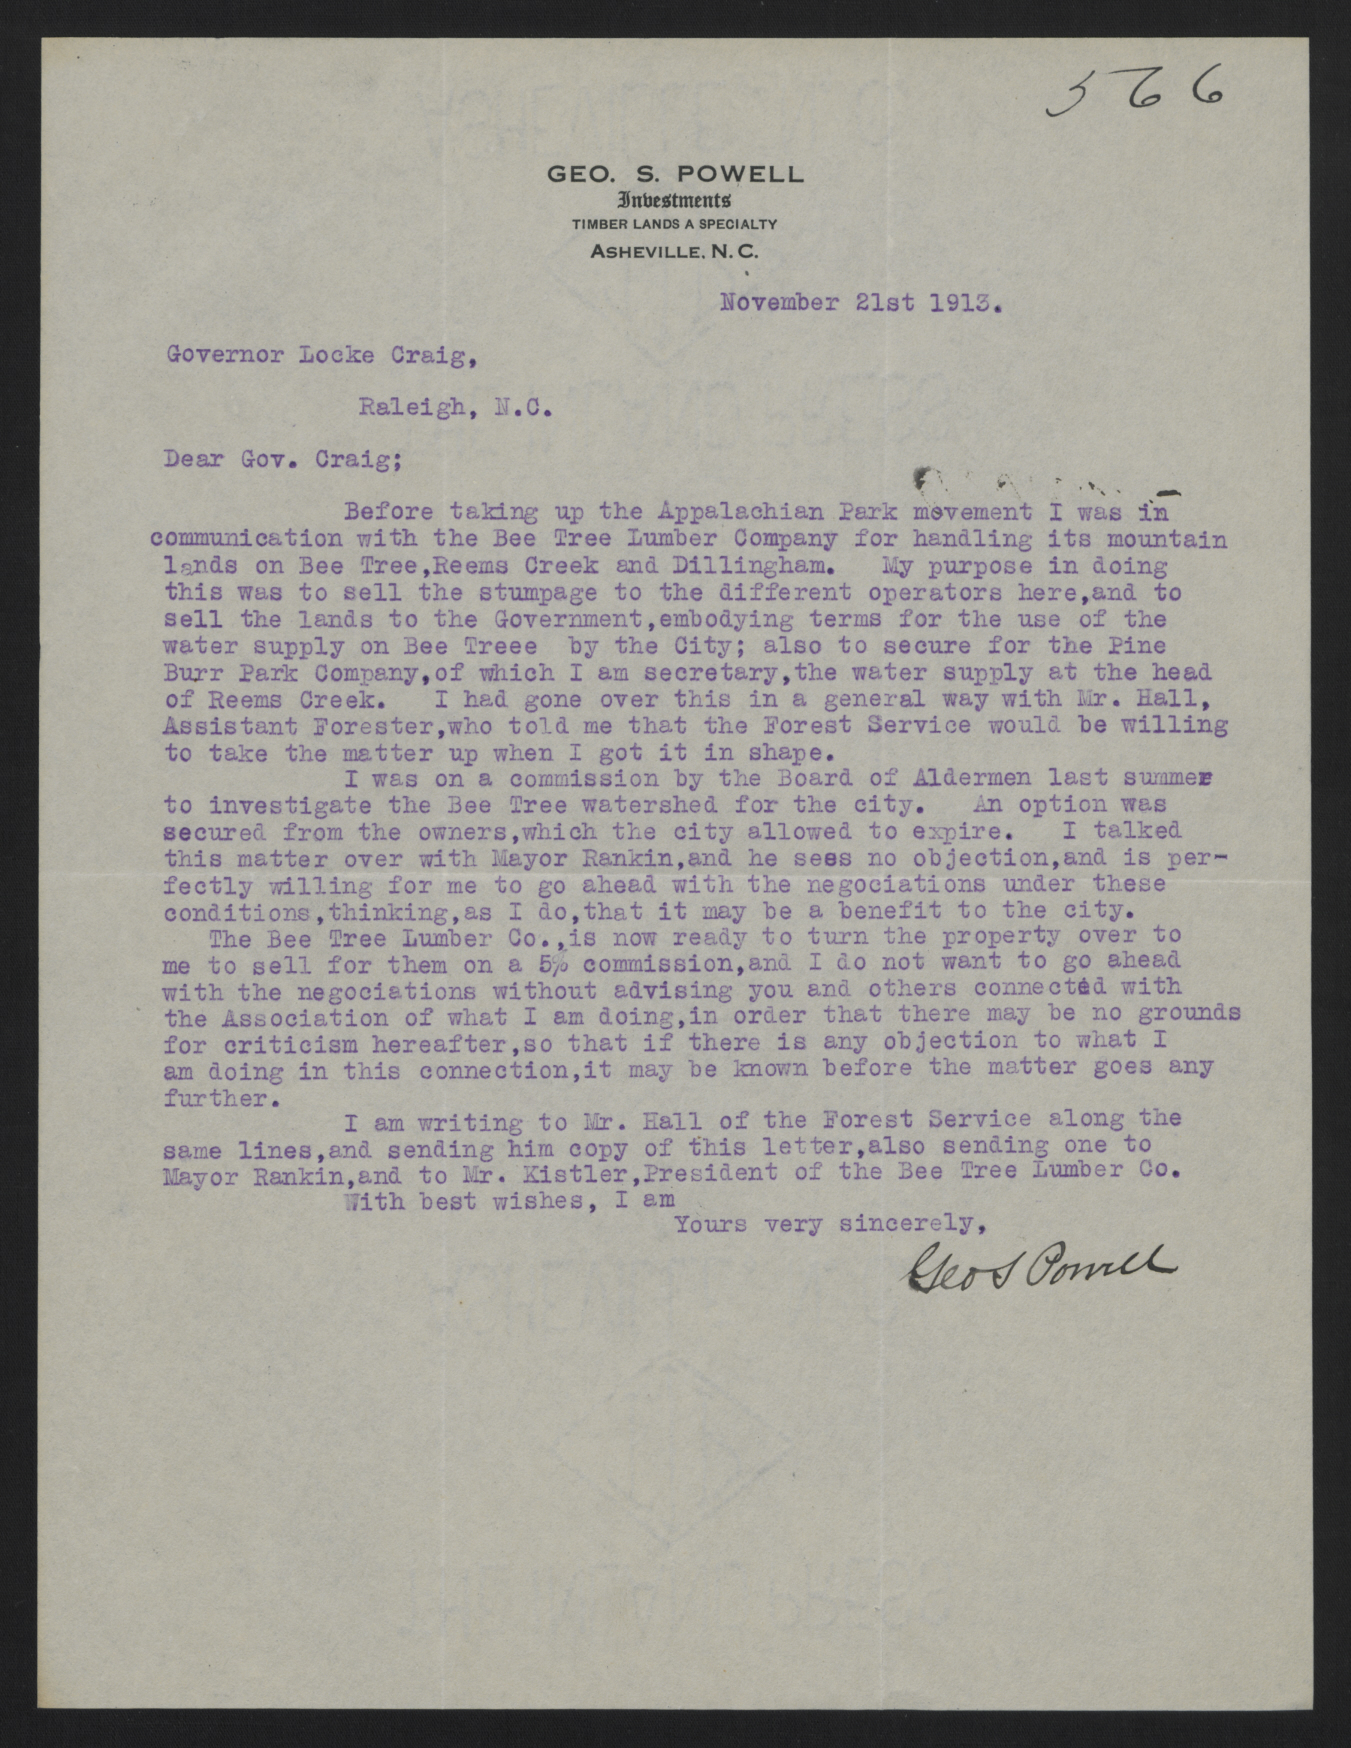 Letter from Powell to Craig, November 21, 1913